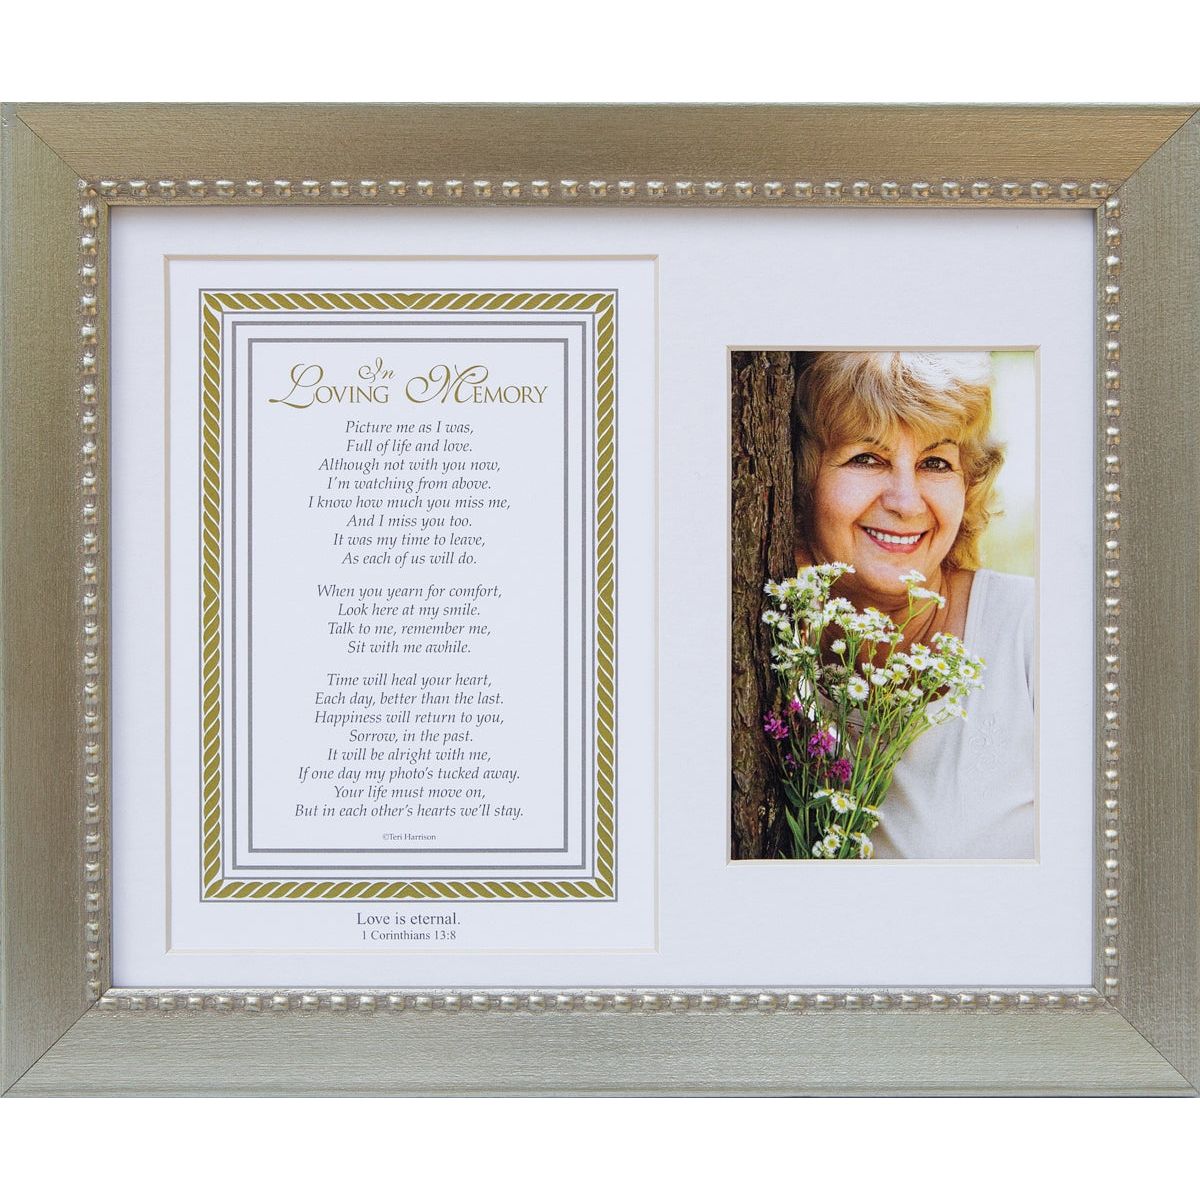 8x10 silver-toned beaded wood frame with white mat &quot;In Loving Memory&quot; poem with scripture and opening for a photo.